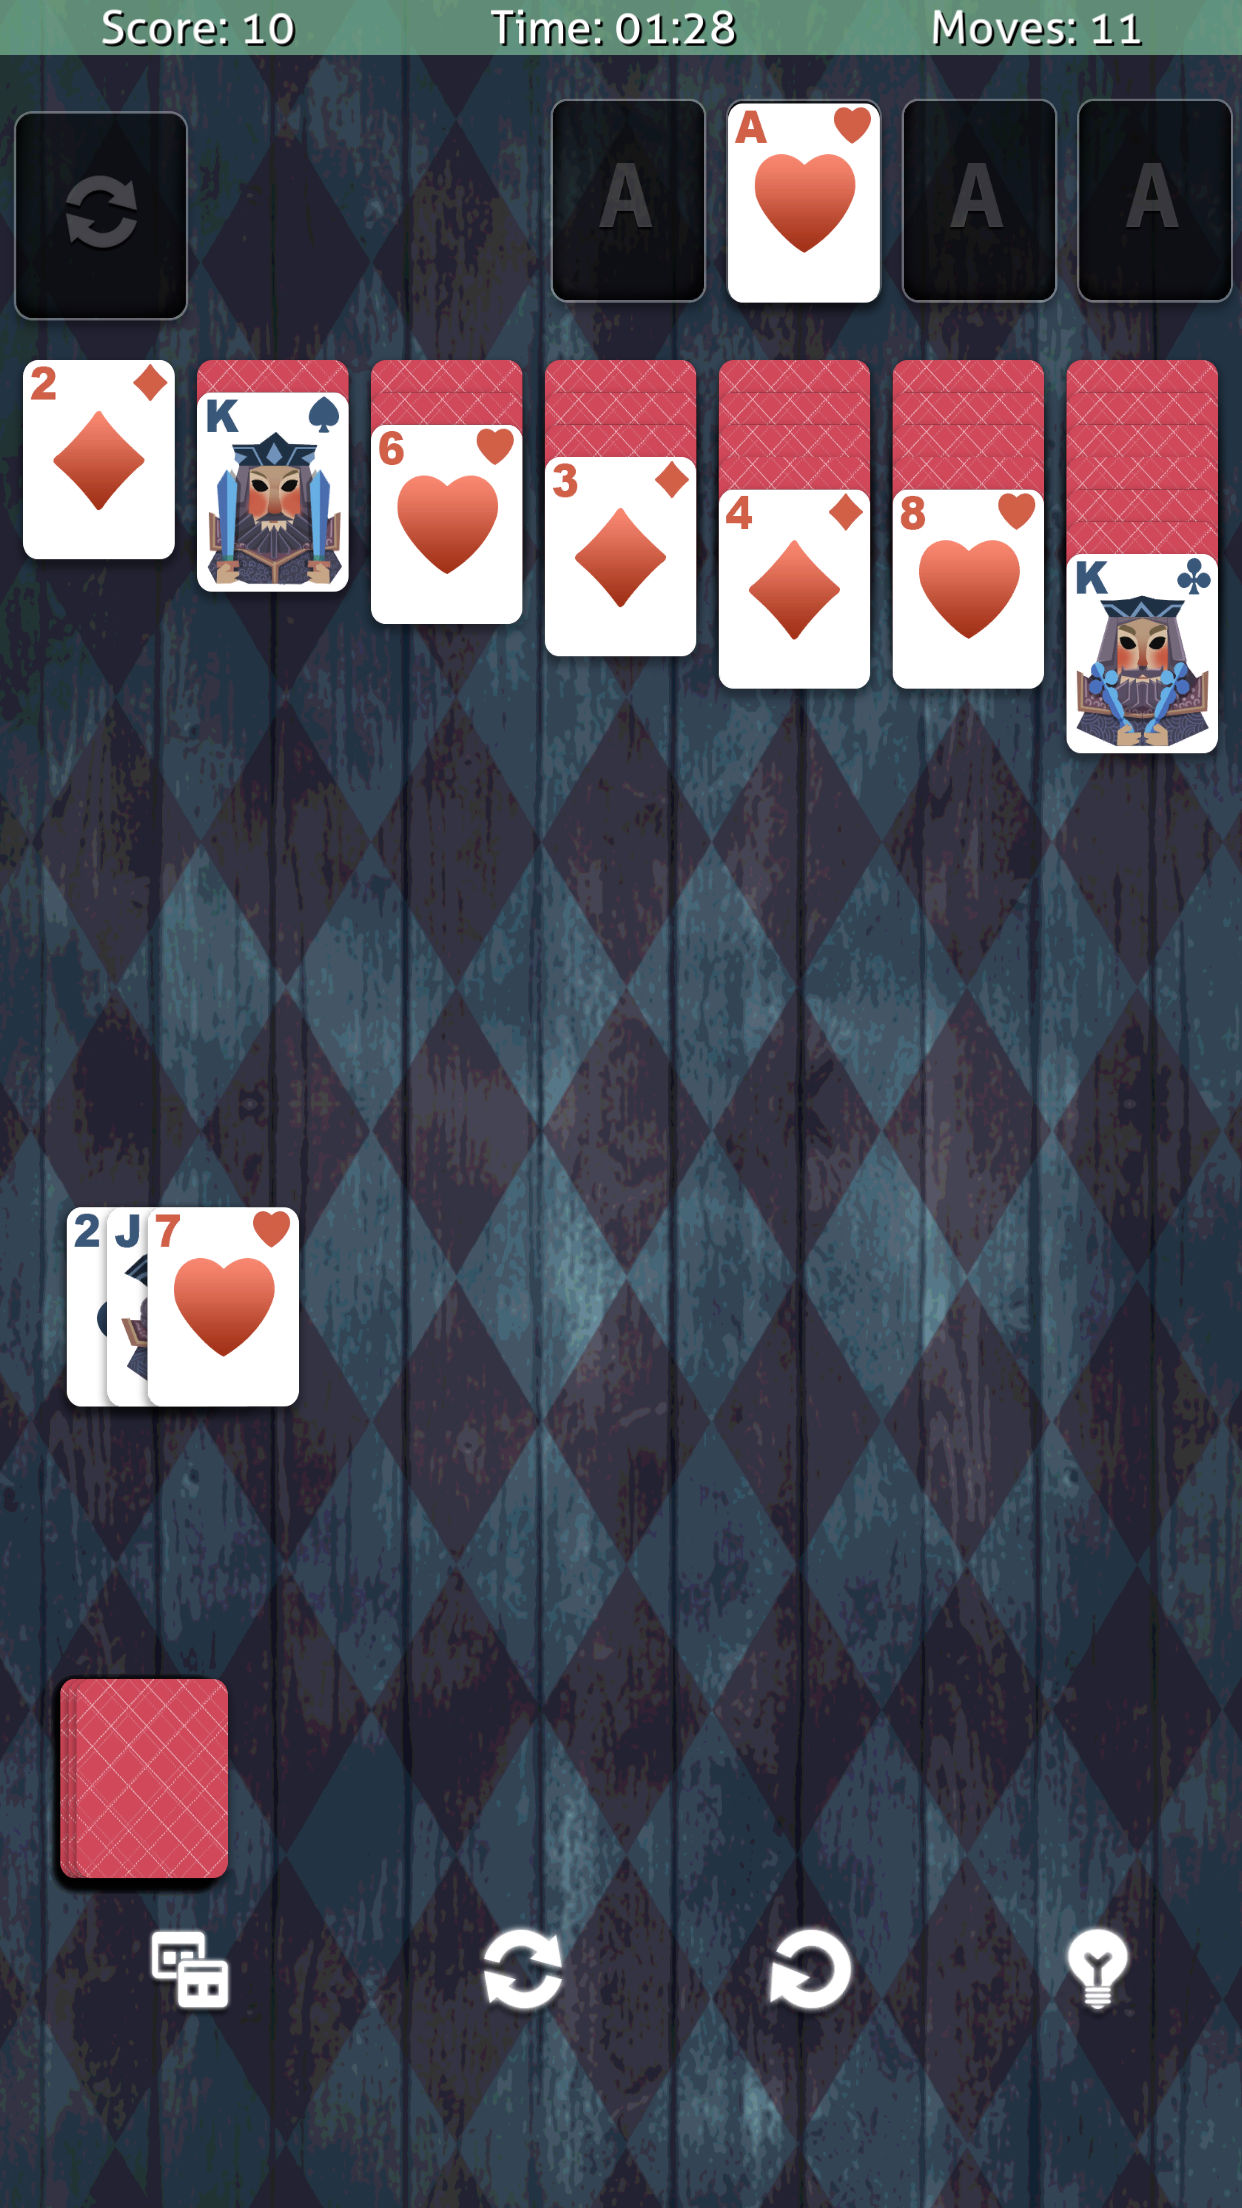 Solitaire #1 / Solitaire Kings Ultimate Game Apple AppStore - Google Play Store Image 4